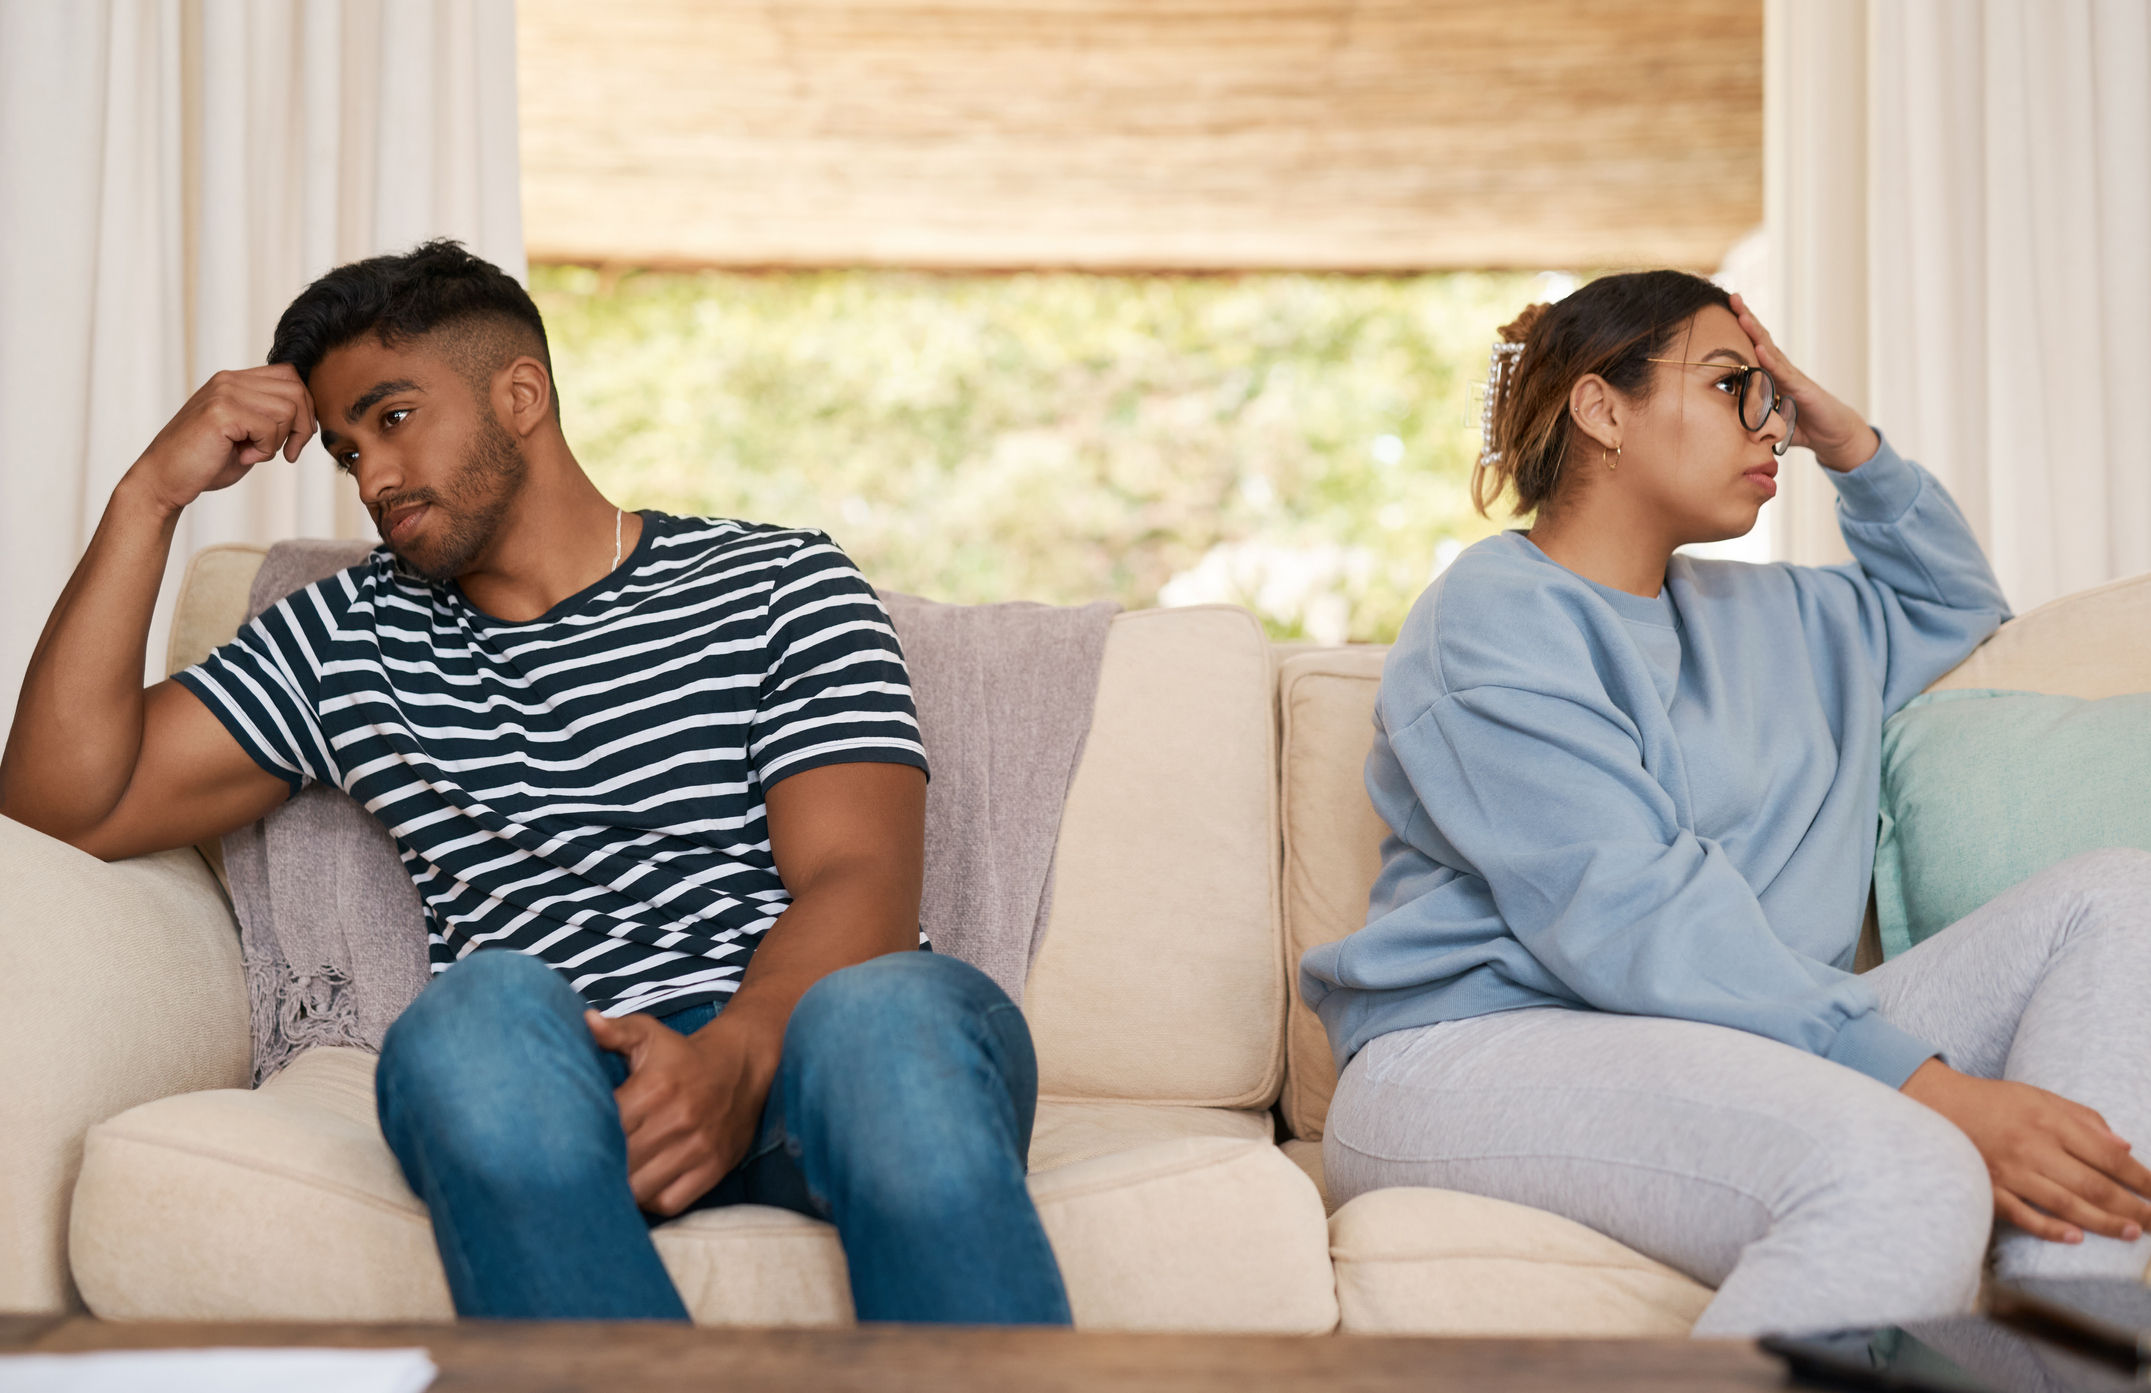 An upset couple sit on a couch not facing each other, both appearing thoughtful and distant